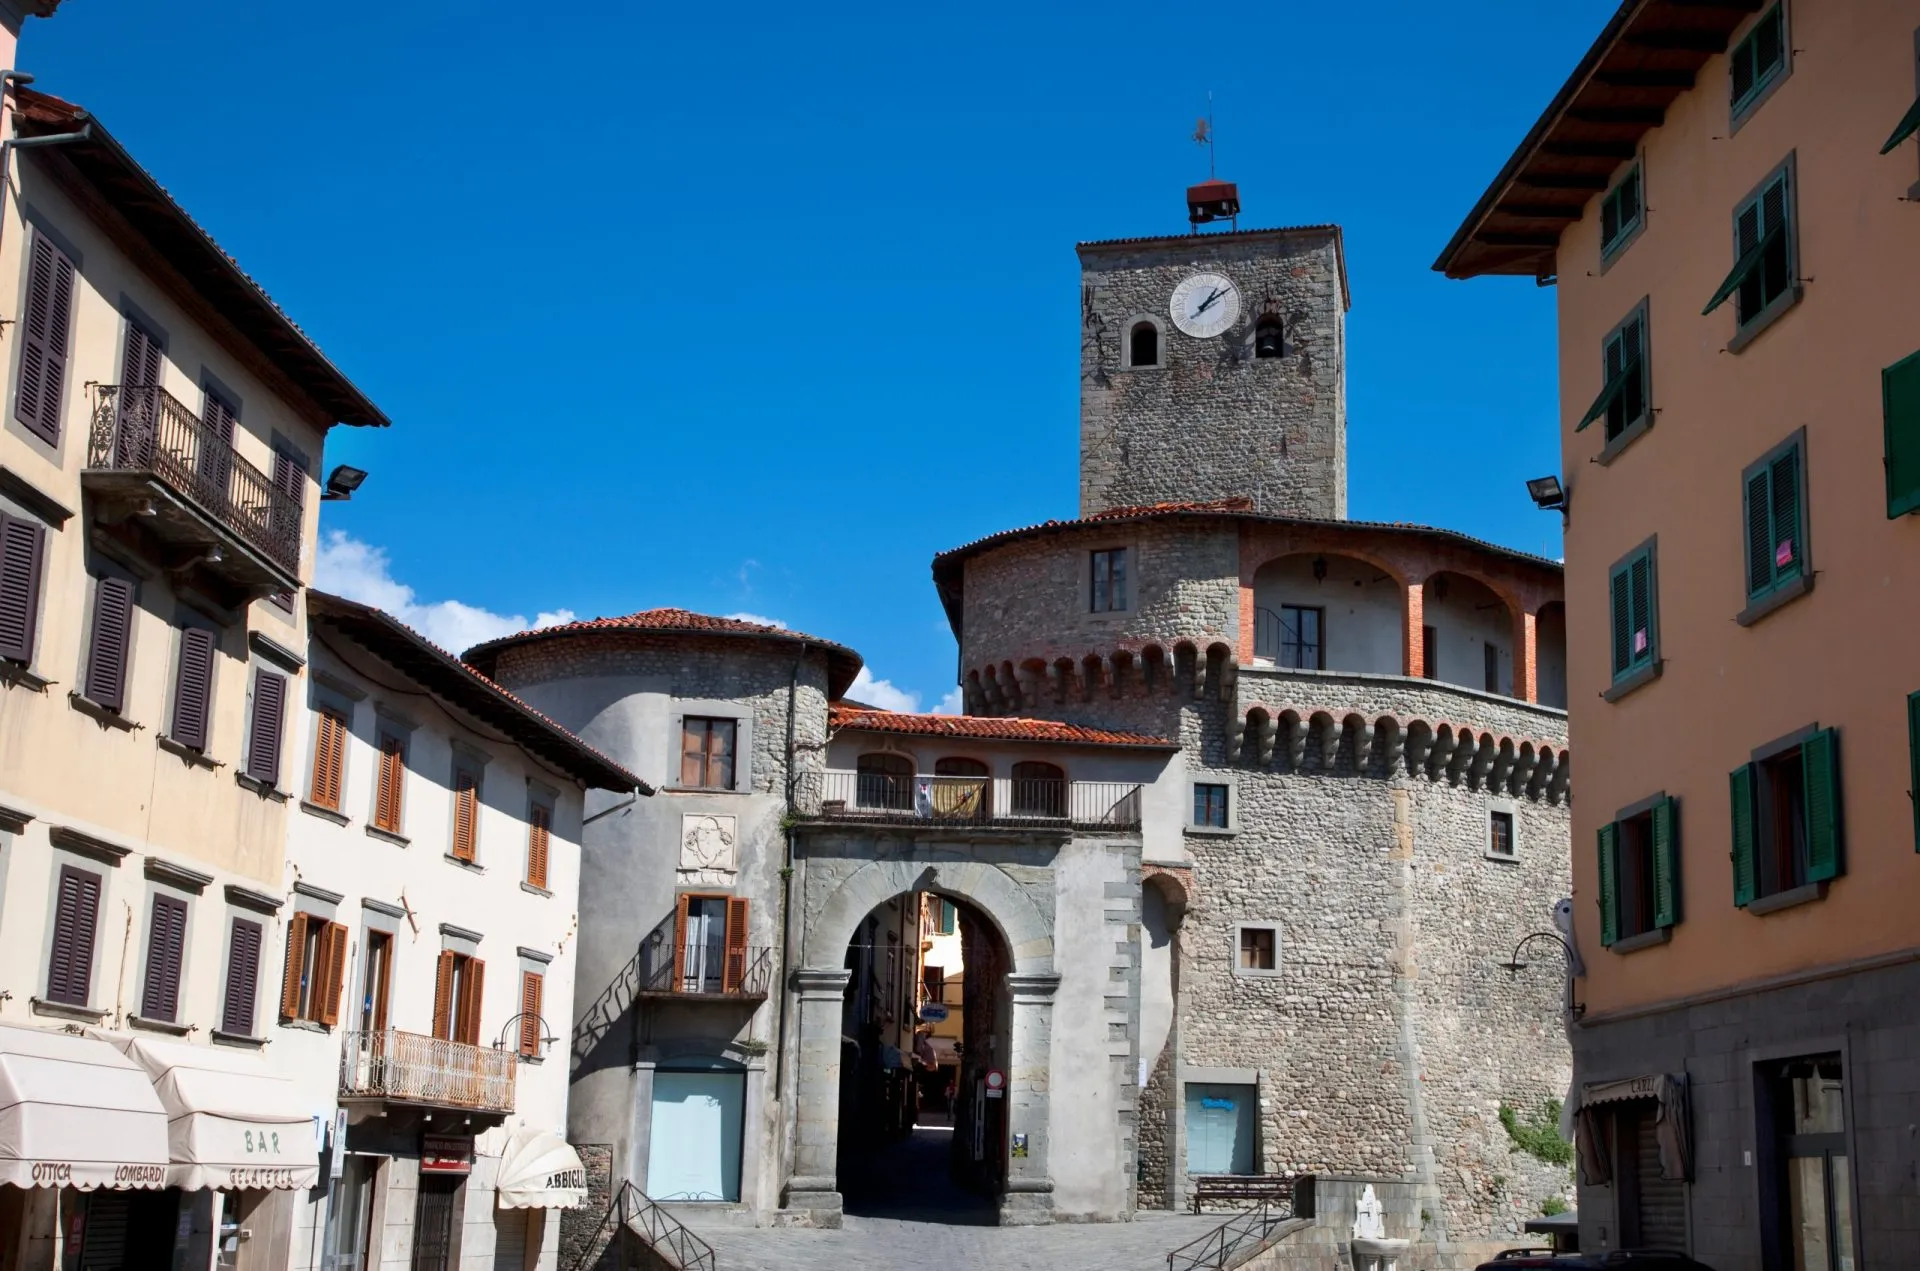 Castelnuovo di Garfagnana, Tuscany, Italy - Low angle view of old world buildings and a clock tower.